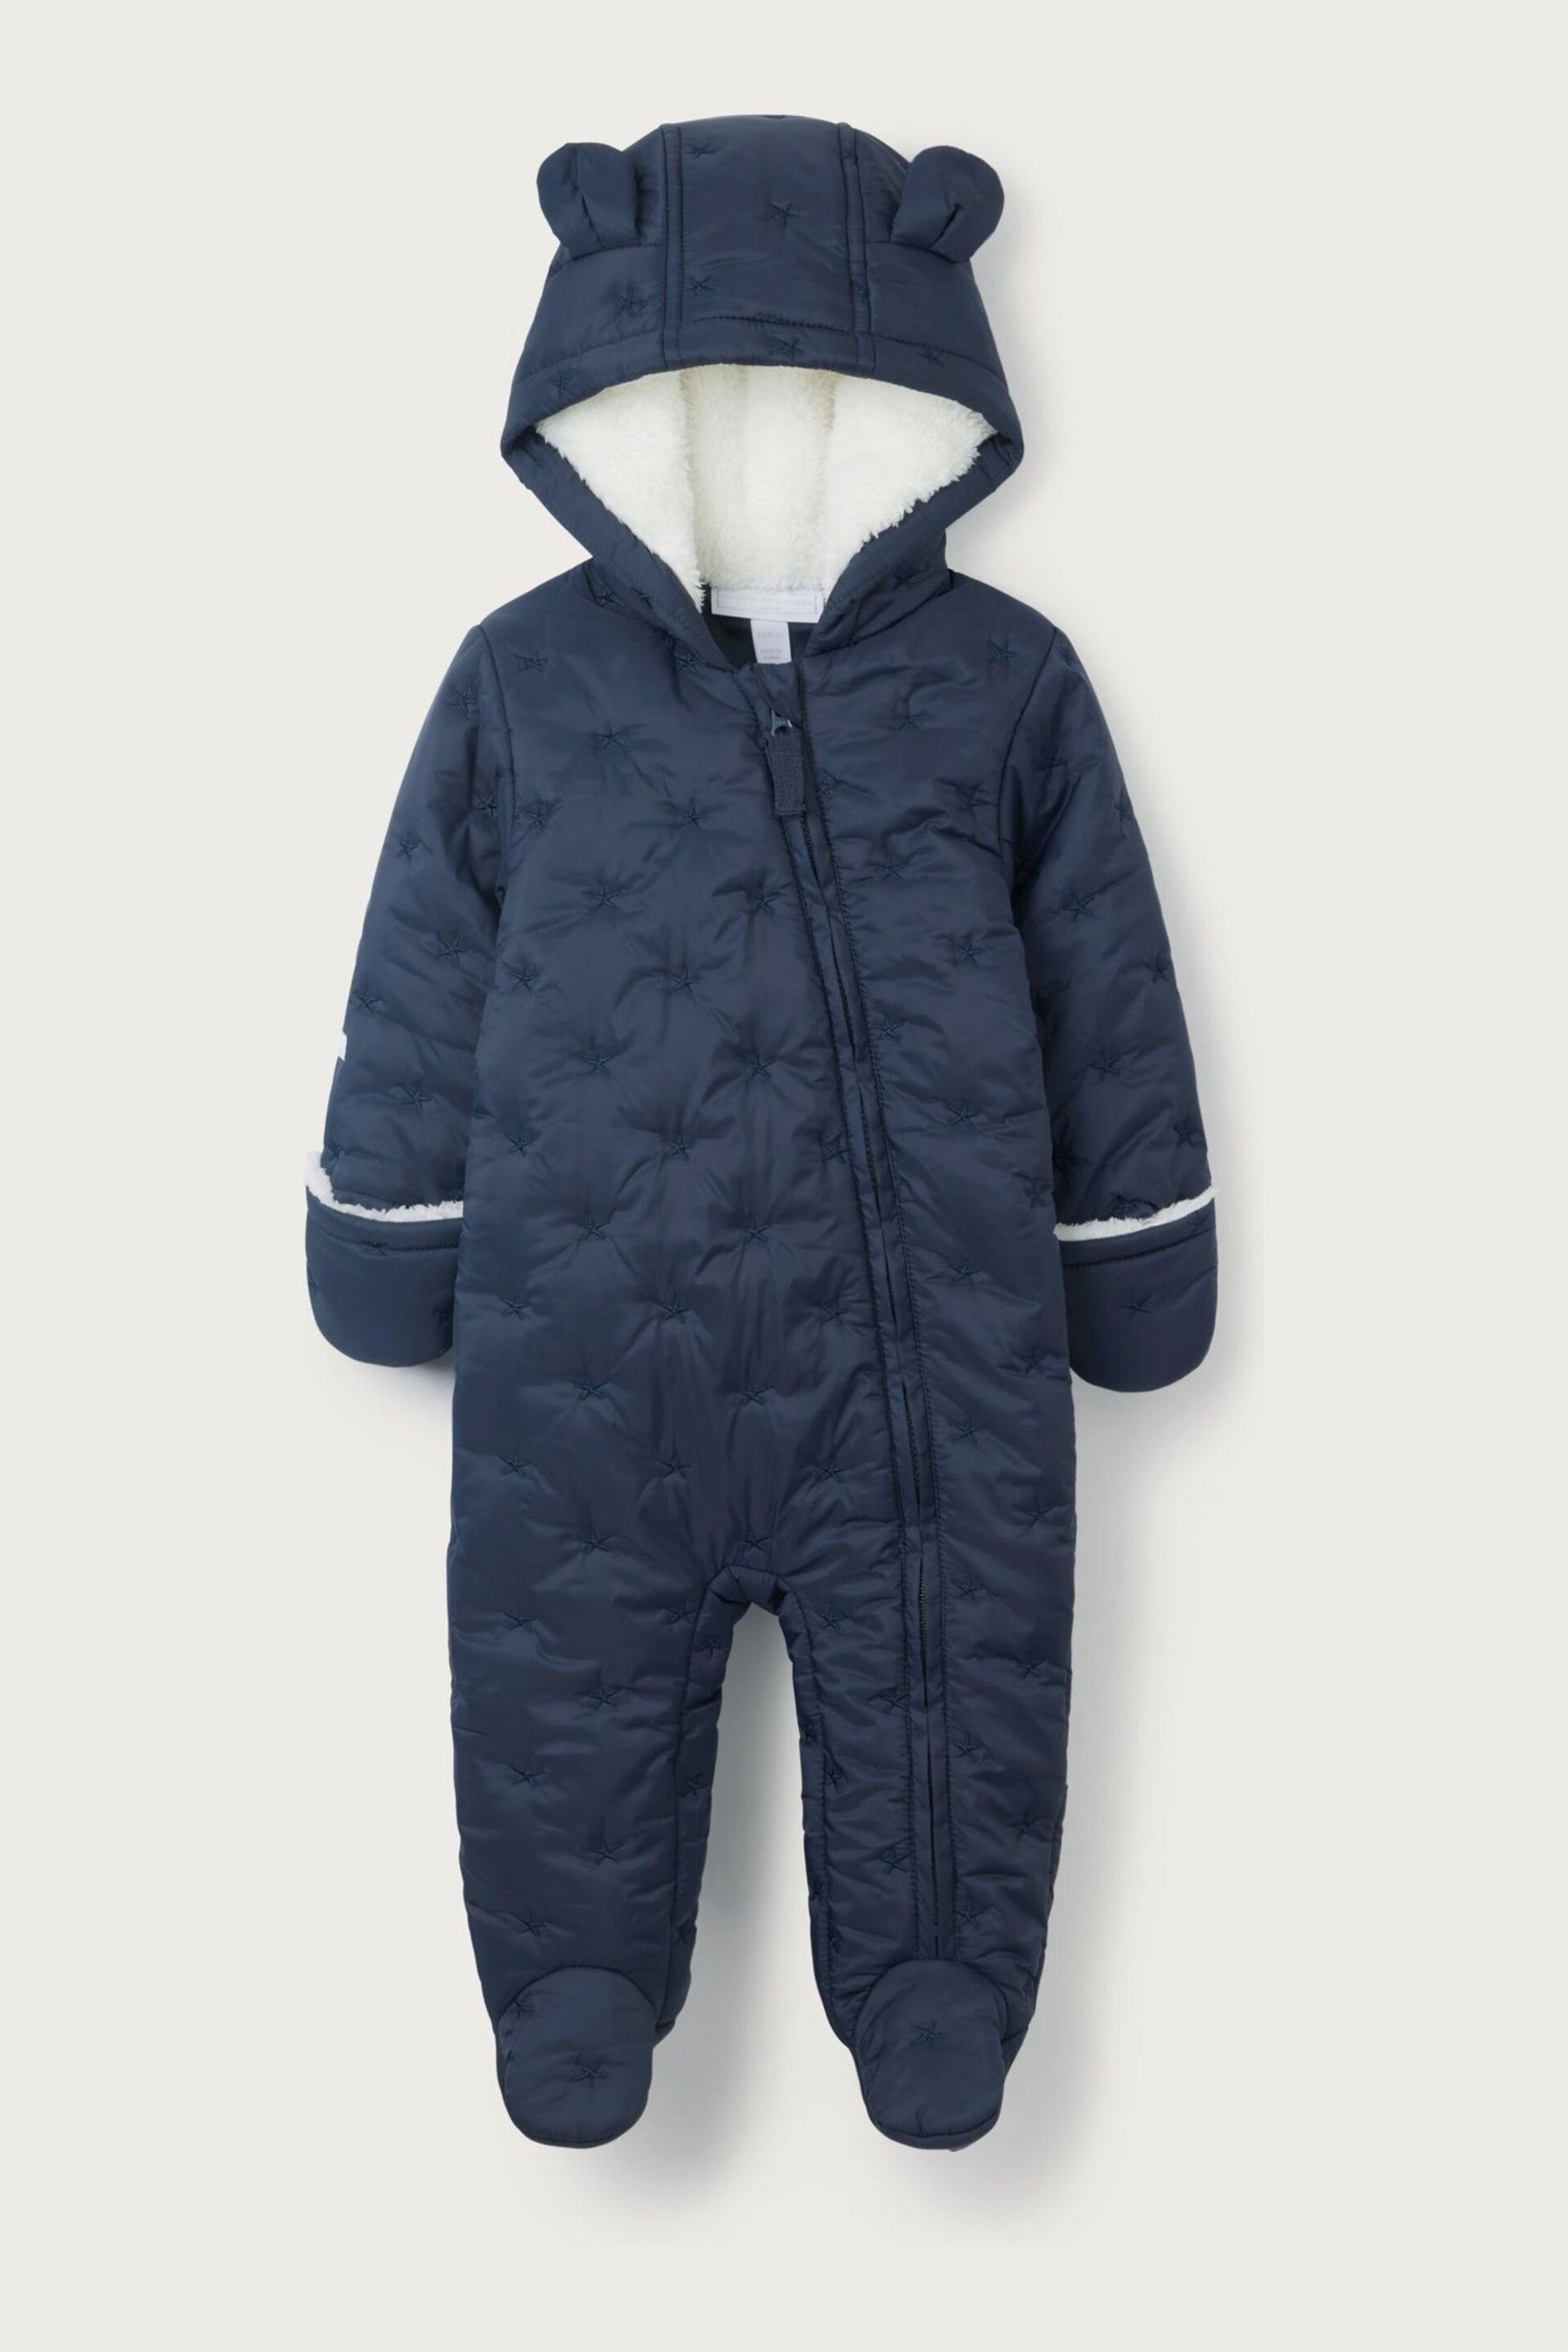 The White Company Blue Star Quilted Pramsuit - Image 3 of 4